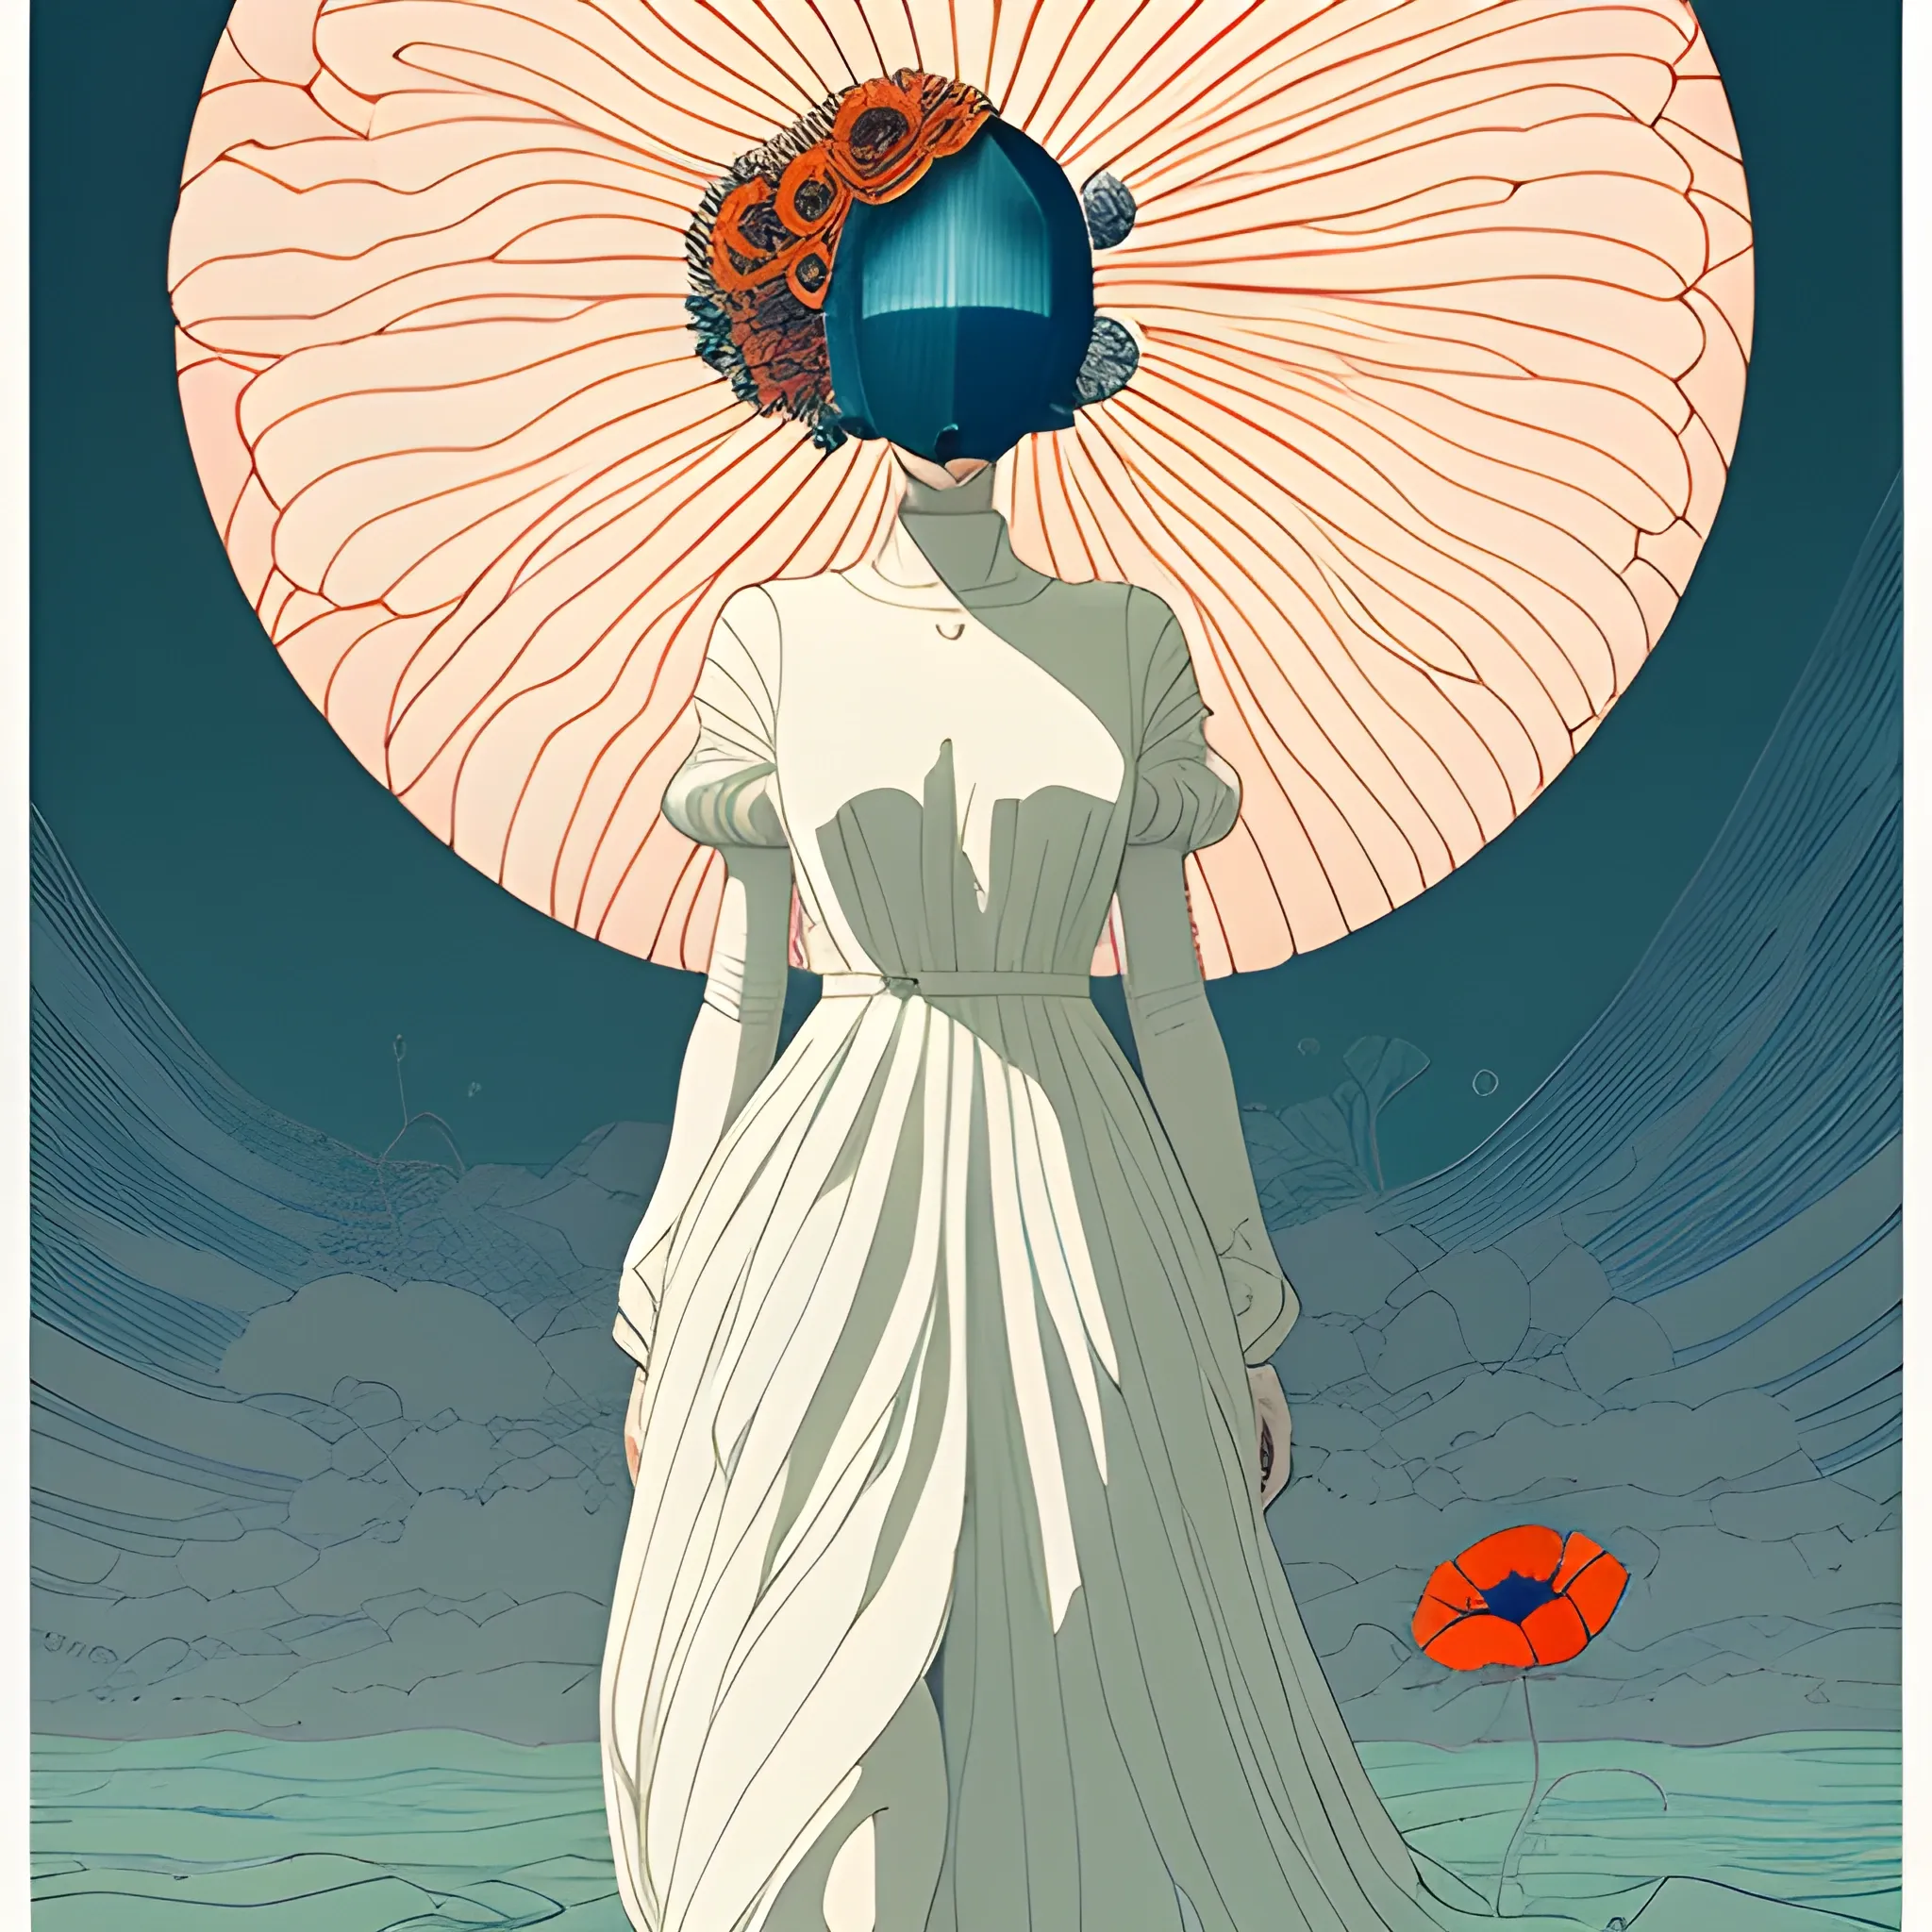 giant poppies flower head, woman white dress walking, dramatic light, victo ngai, james jean, moebius style, surreal, dramatic light, inking lines, Water soft Color